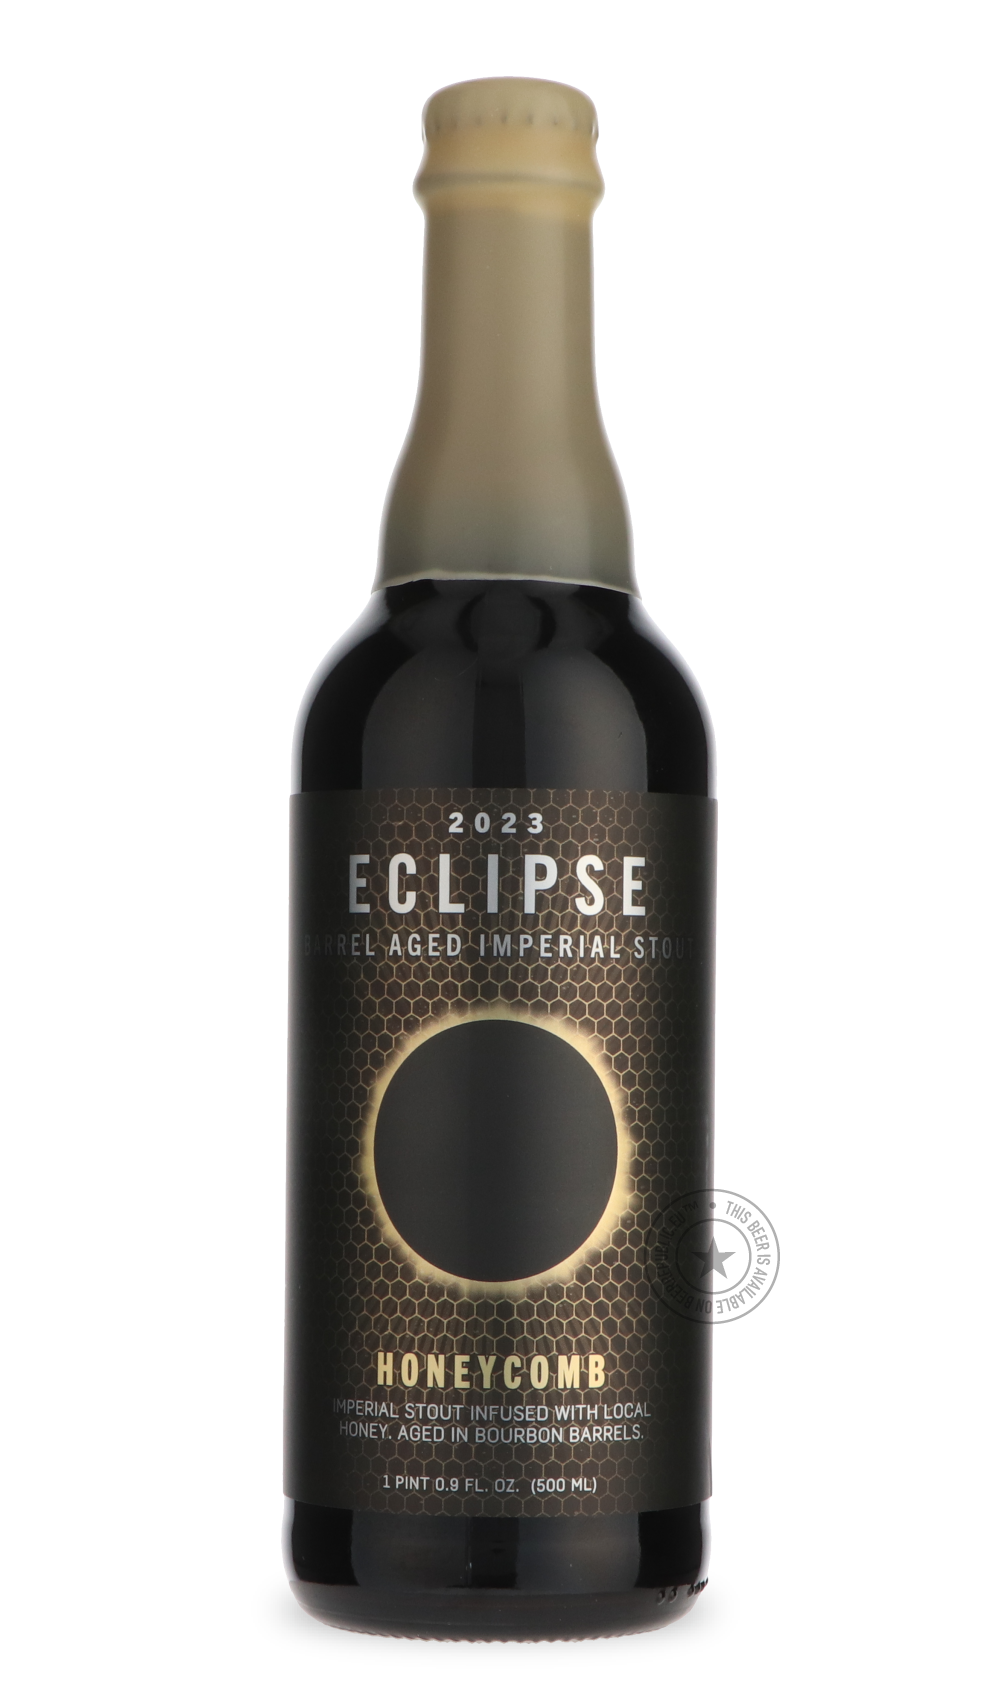 -FiftyFifty- Eclipse - Honycomb (2023)-Stout & Porter- Only @ Beer Republic - The best online beer store for American & Canadian craft beer - Buy beer online from the USA and Canada - Bier online kopen - Amerikaans bier kopen - Craft beer store - Craft beer kopen - Amerikanisch bier kaufen - Bier online kaufen - Acheter biere online - IPA - Stout - Porter - New England IPA - Hazy IPA - Imperial Stout - Barrel Aged - Barrel Aged Imperial Stout - Brown - Dark beer - Blond - Blonde - Pilsner - Lager - Wheat - 